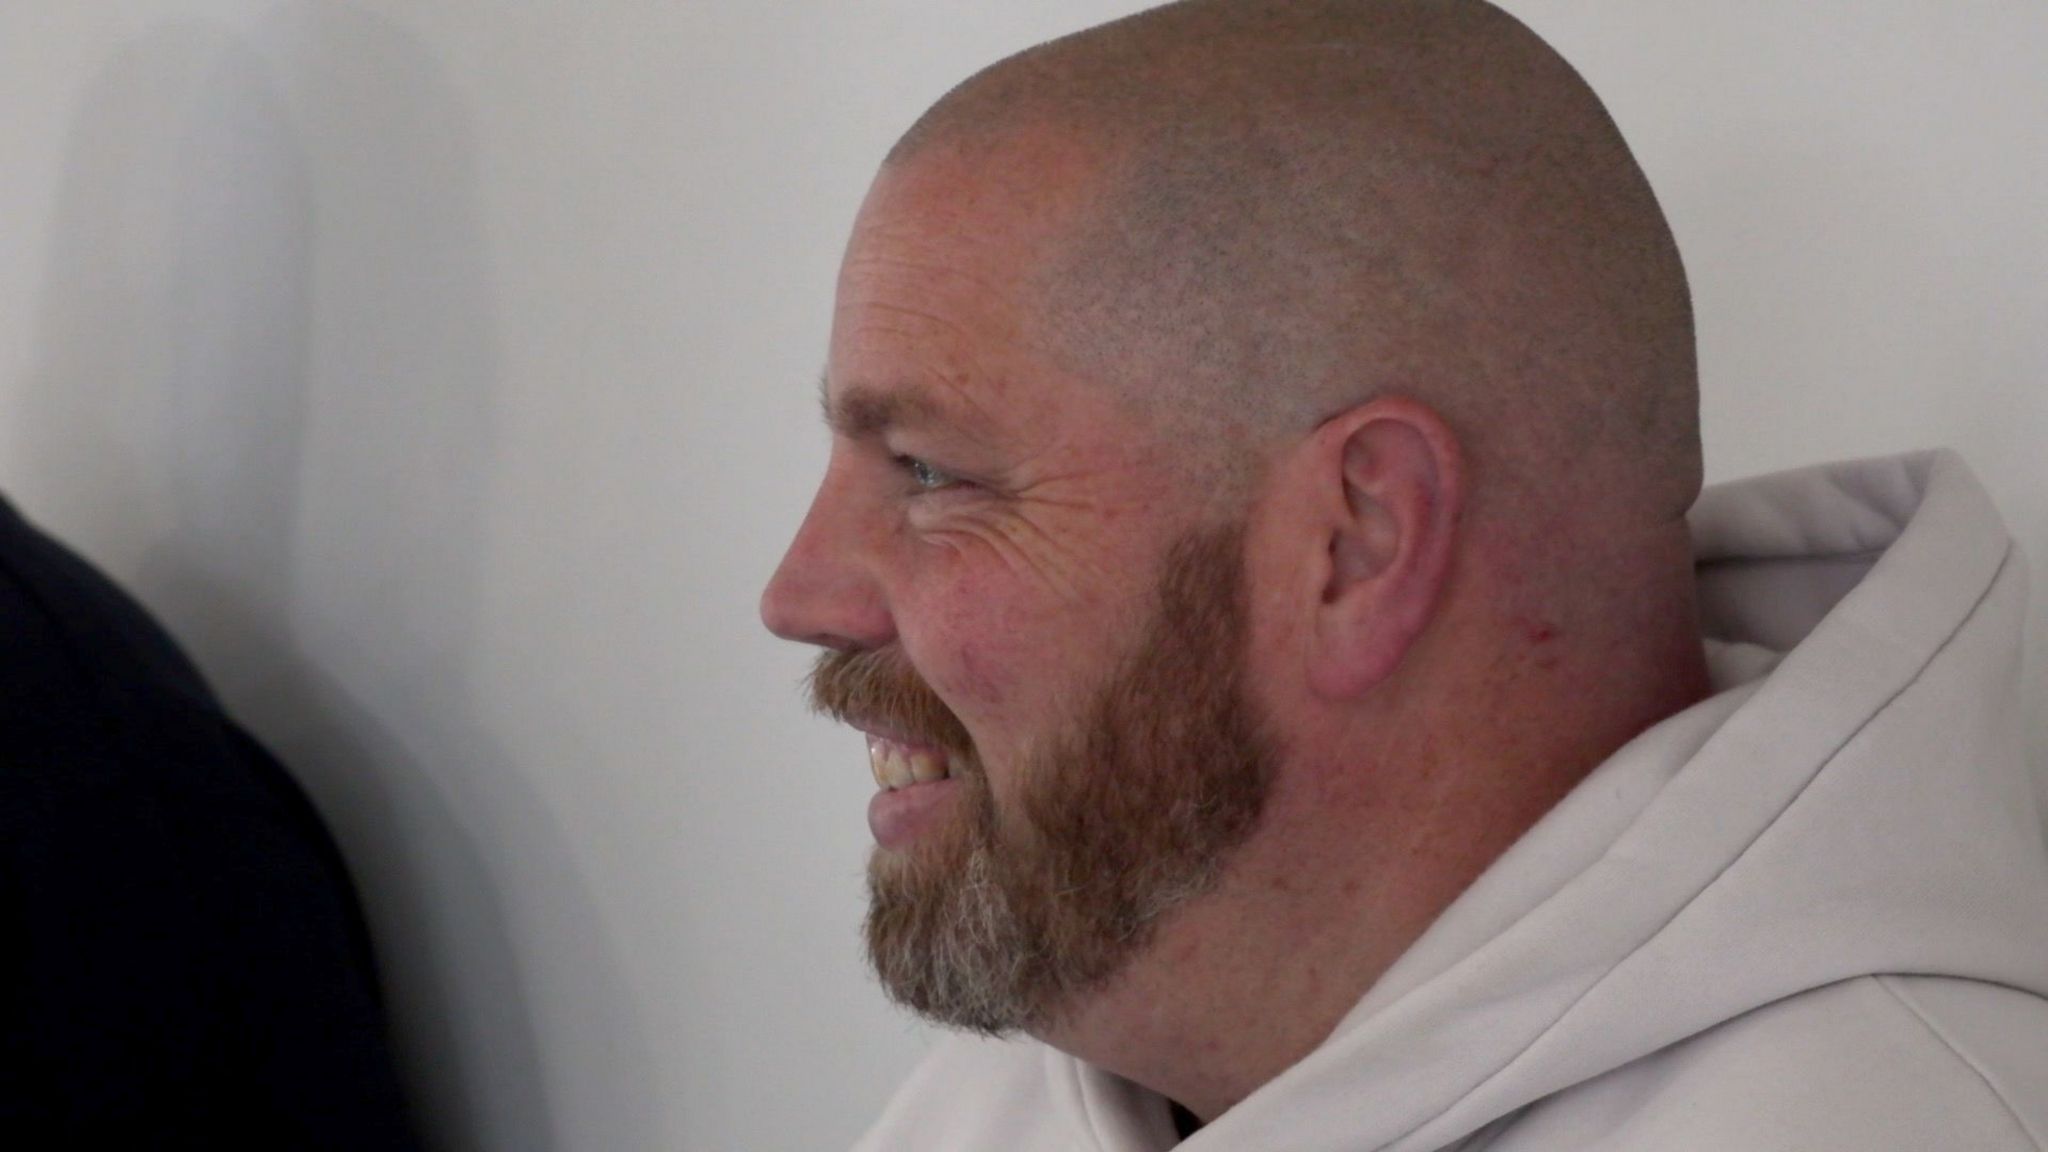 Paul Barran, a white middle aged man with his hair shaved and a ginger beard wears a white hooded jumper and smiles looking away from the camera